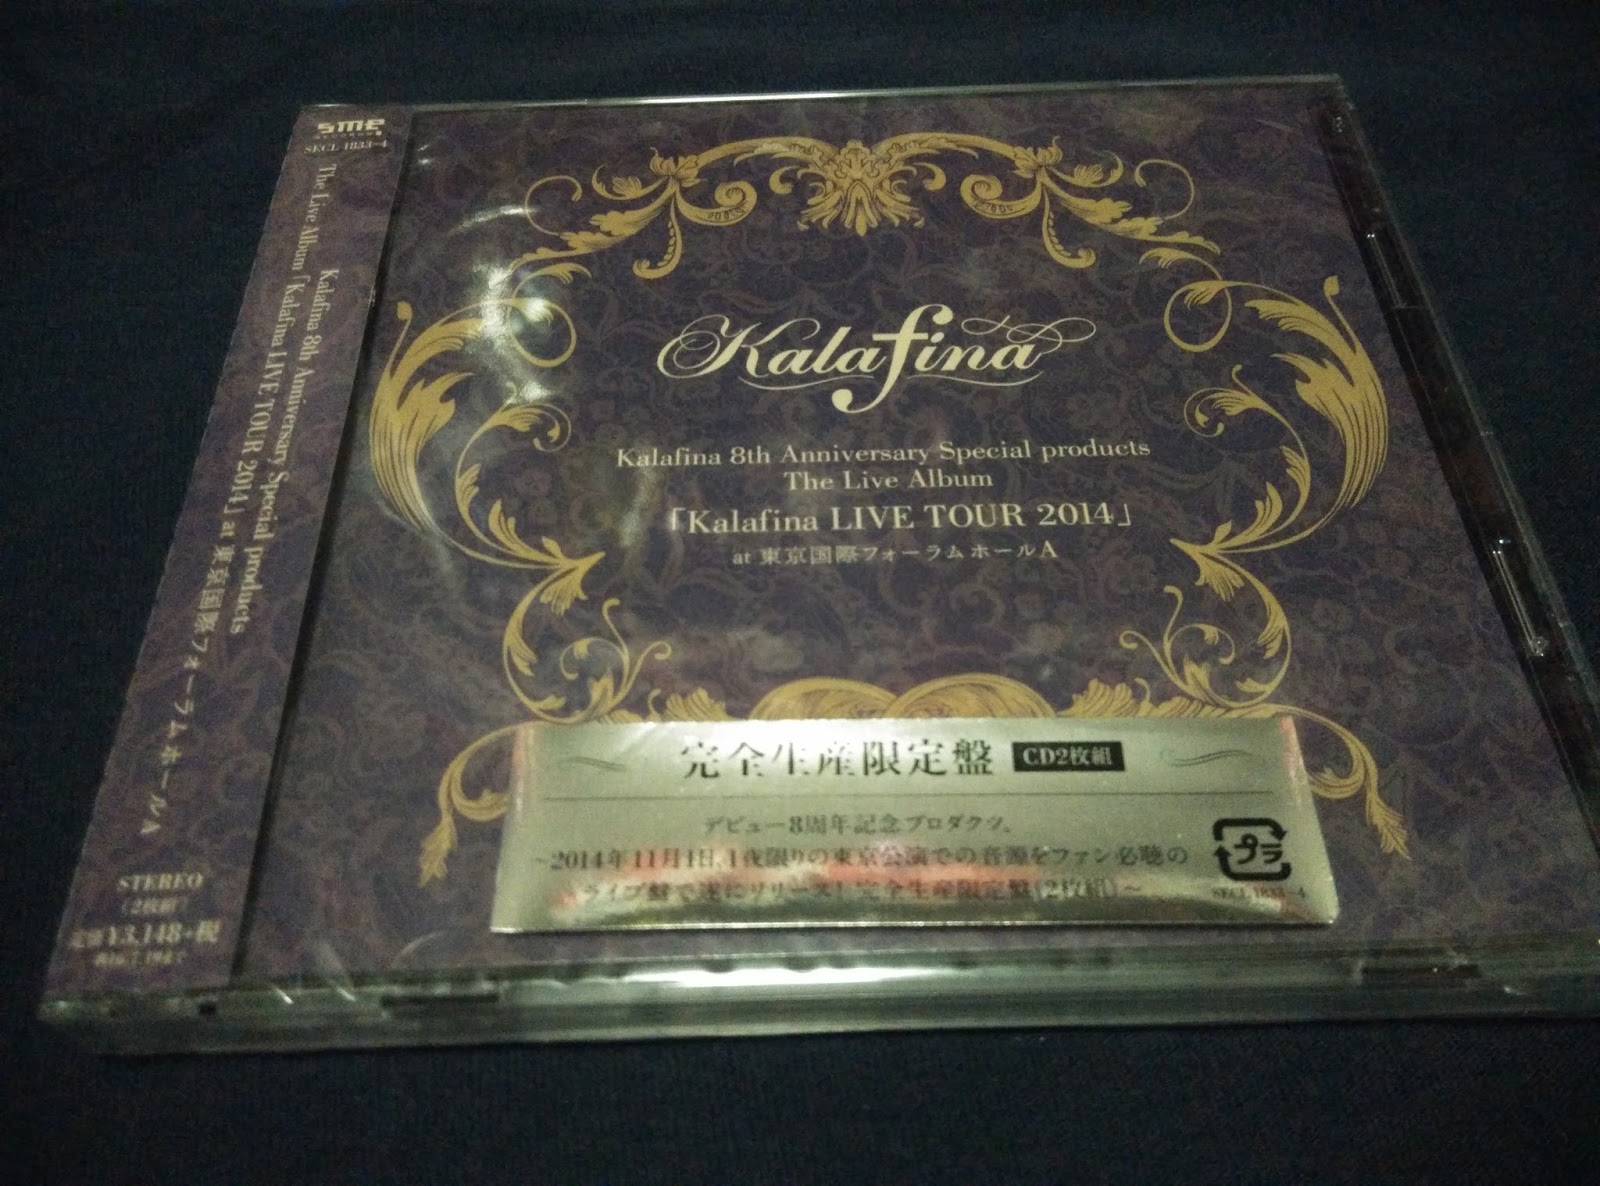 just me: Kalafina 8th Anniversary Special products The Live Album 